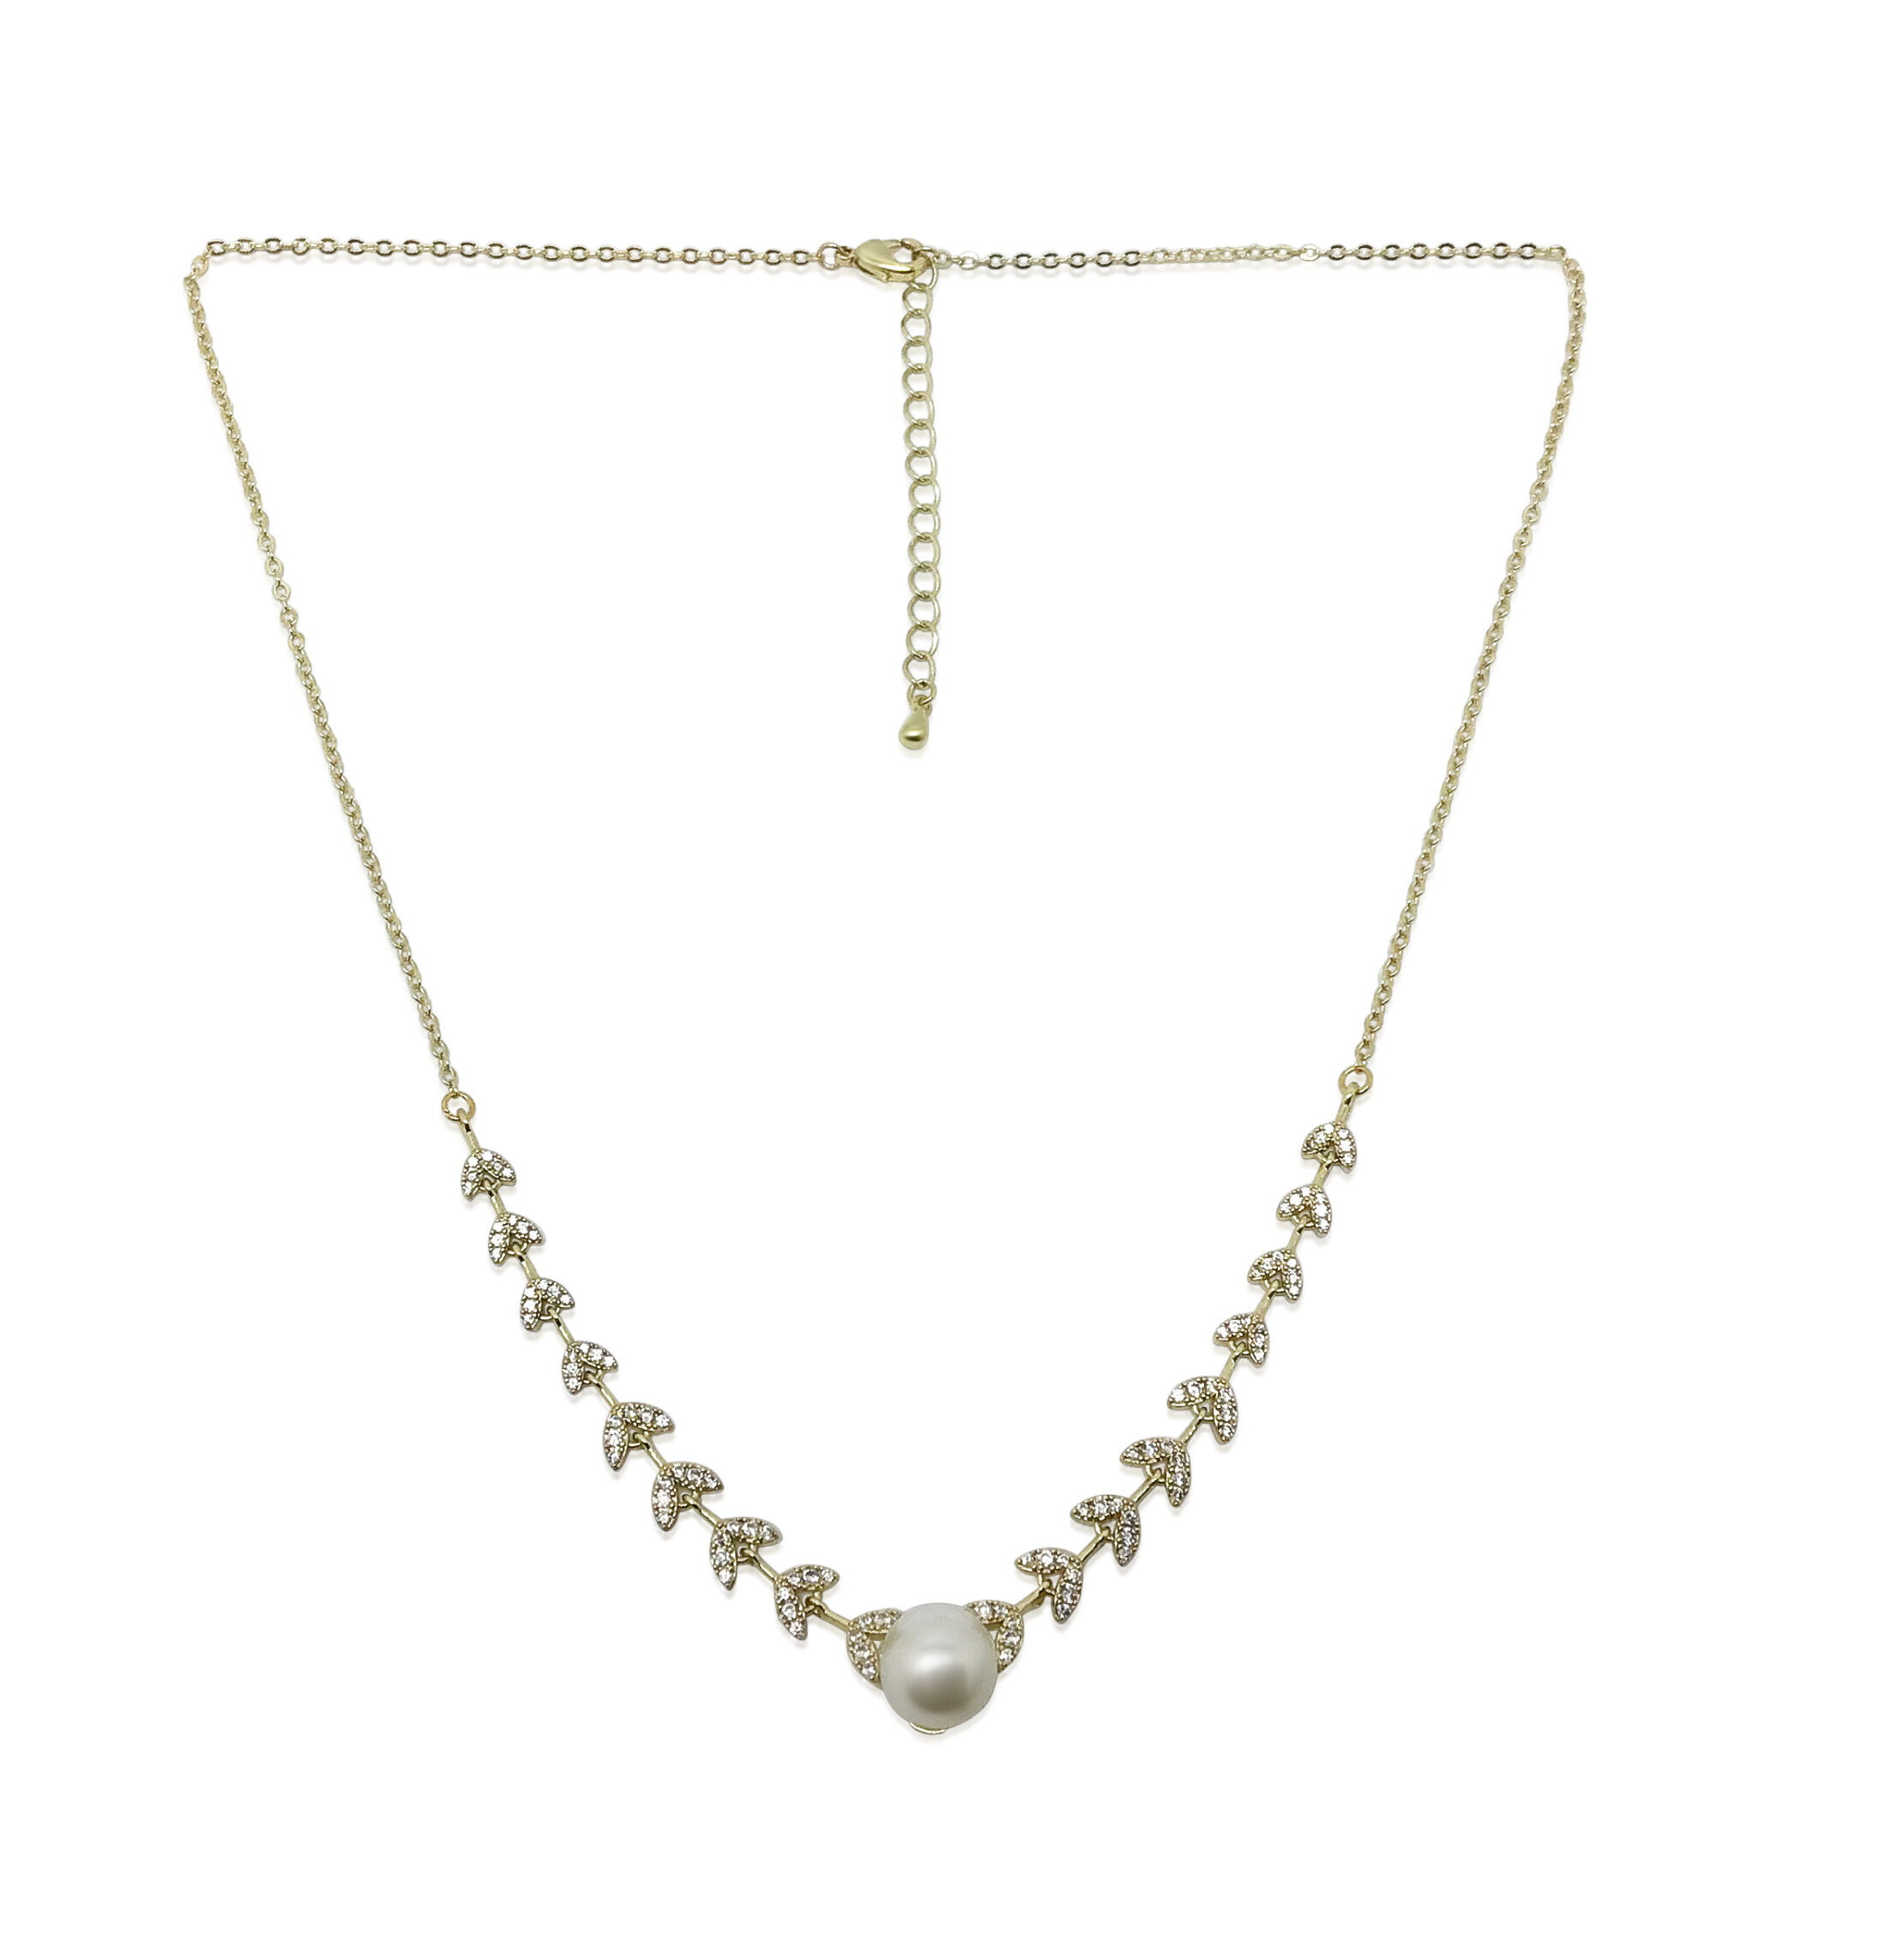 Pearl necklace for wedding day| Cassidy I Jeanette Maree|Shop online now